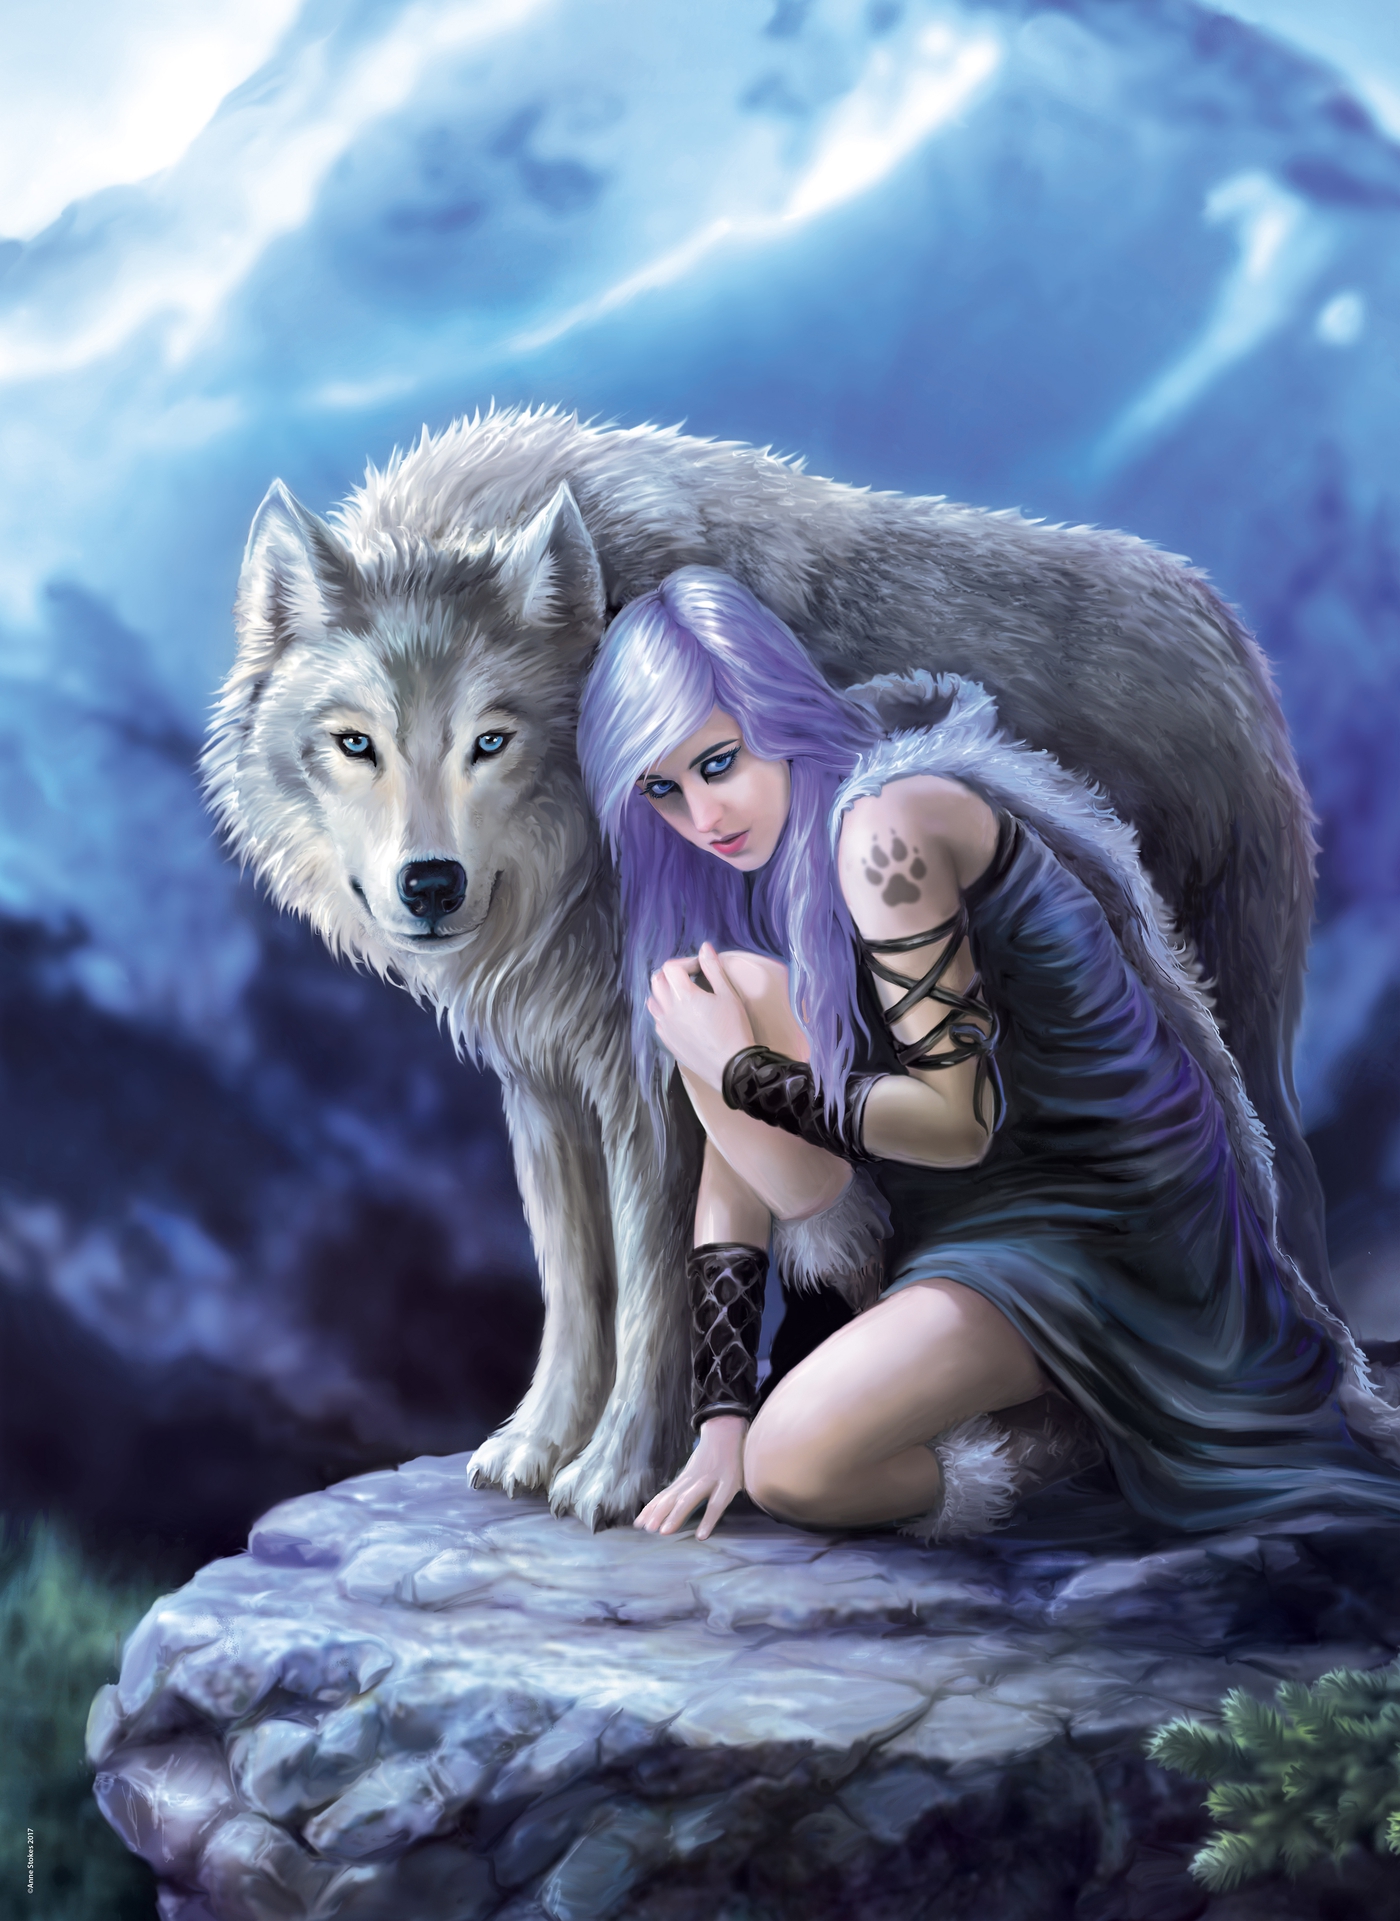 Protector - 1000 pièces - Anne Stokes Collection - Clementoni
